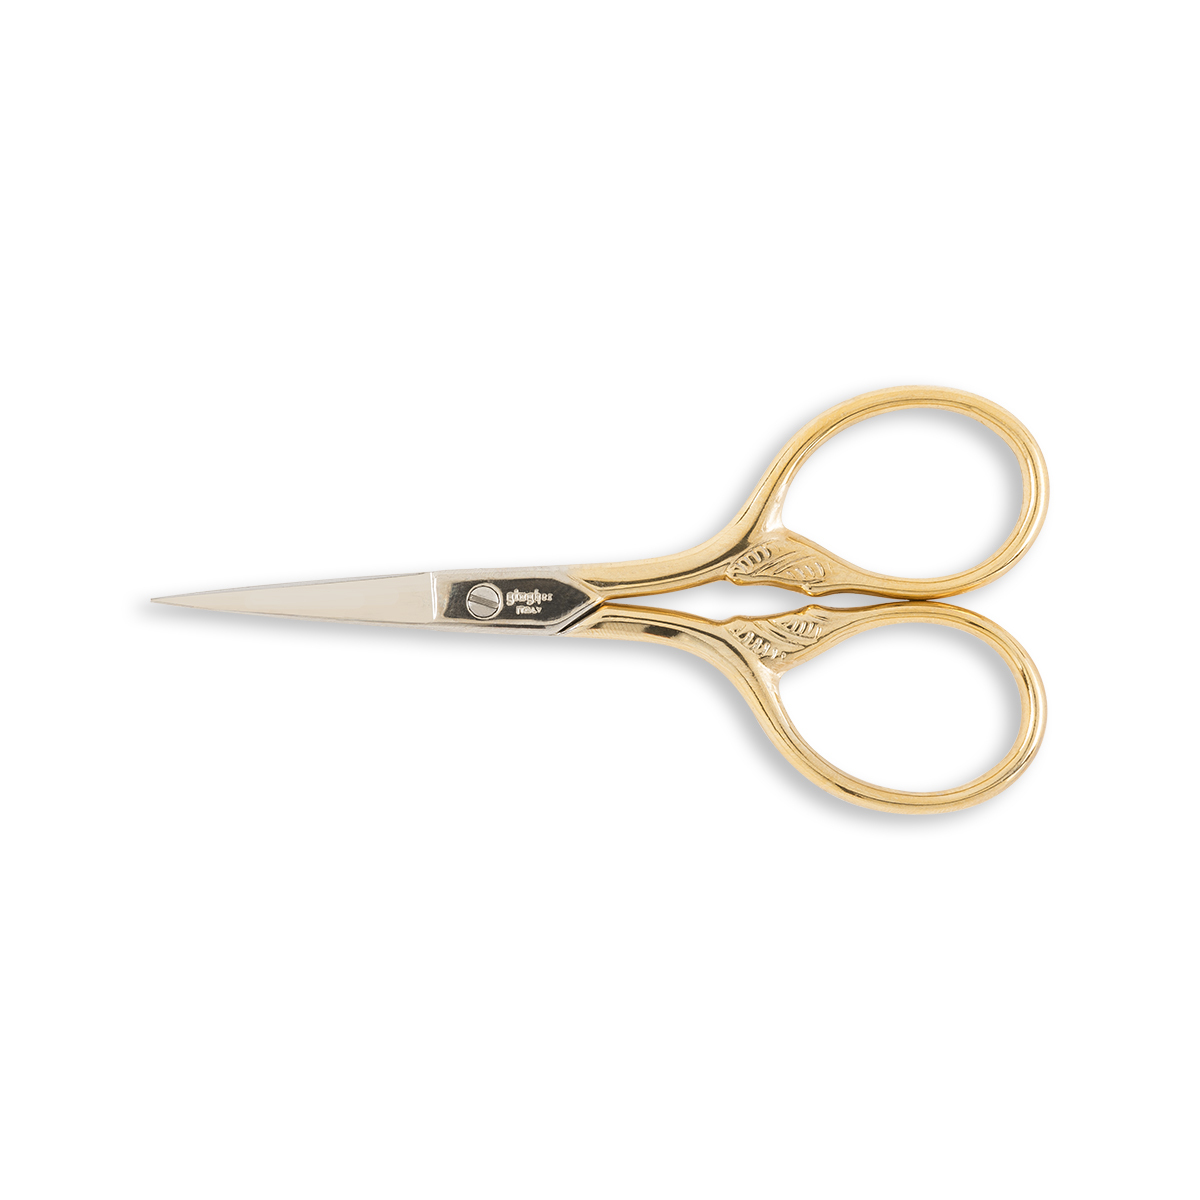 Gingher Gold-Handled Lion's Tail Embroidery Scissors - 3 1/2